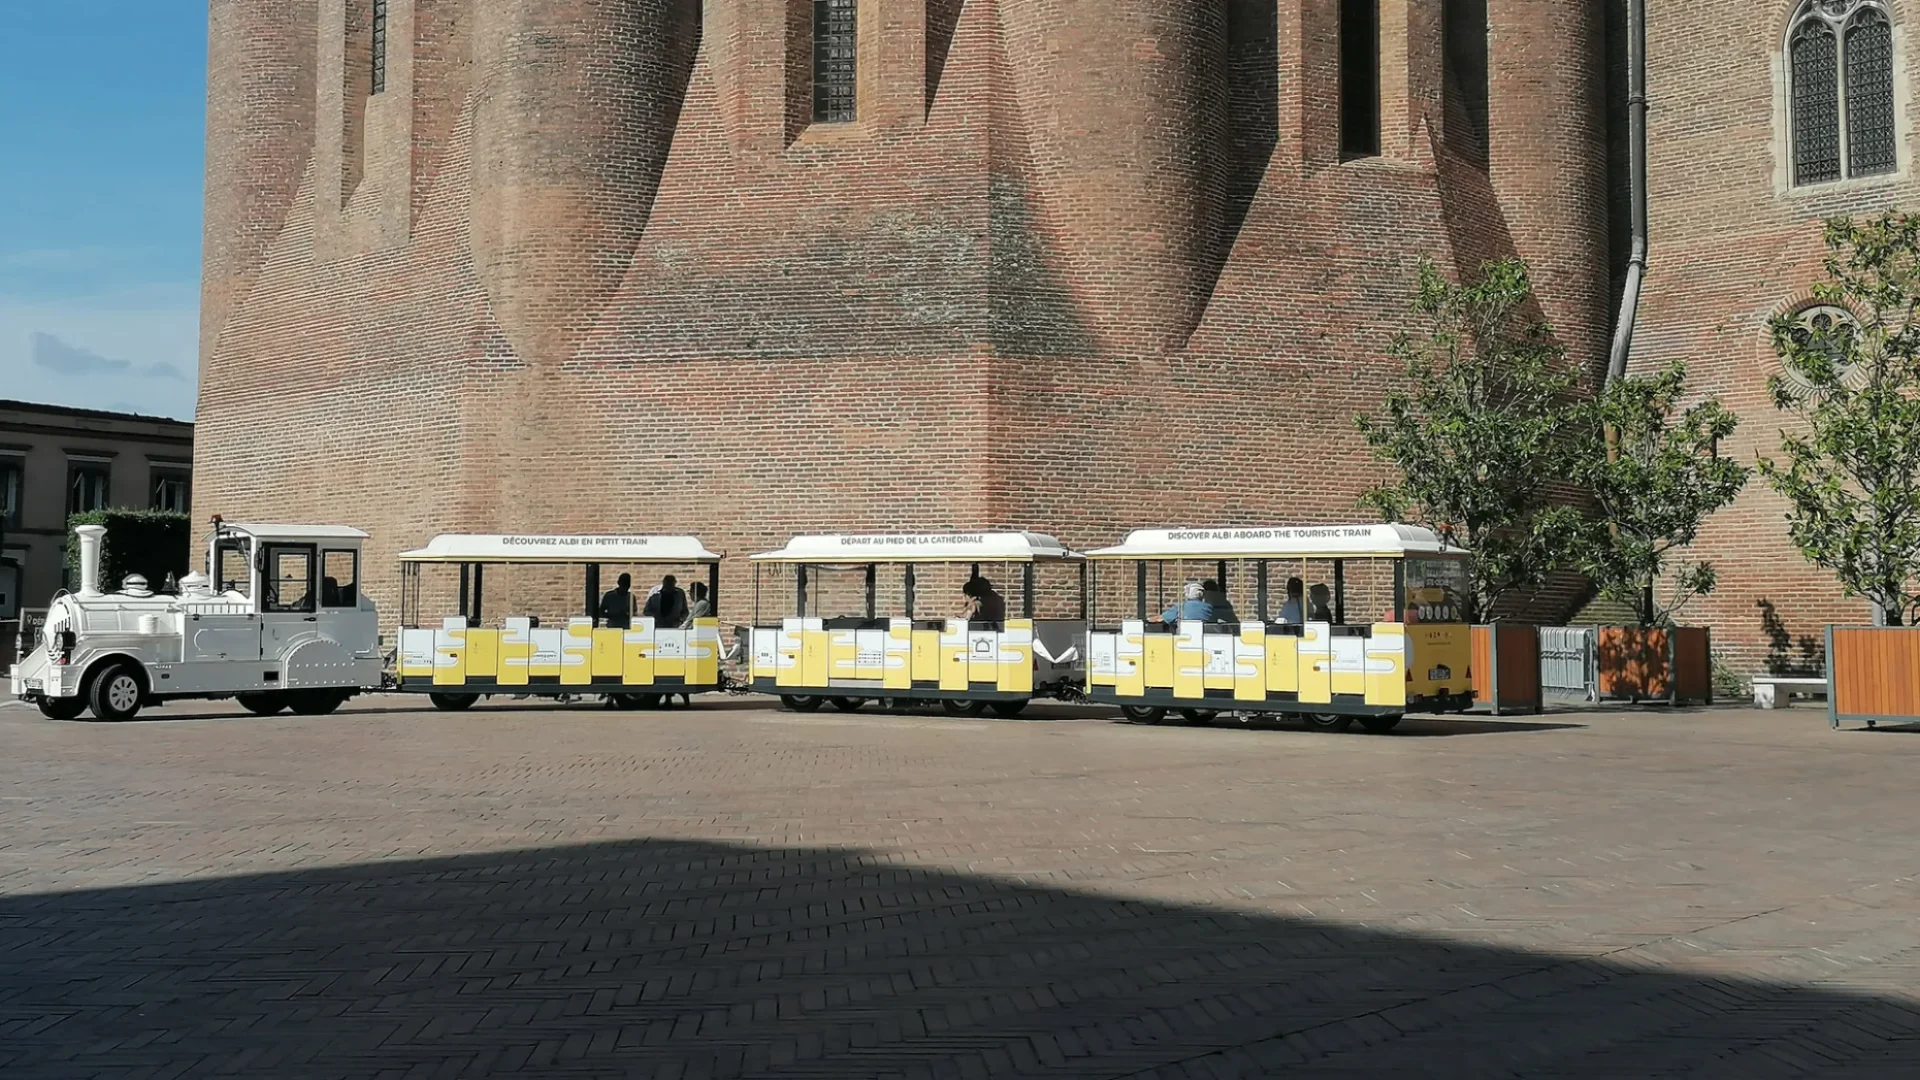 Albi - discovery by tourist train, departure from Place de la Cathedrale